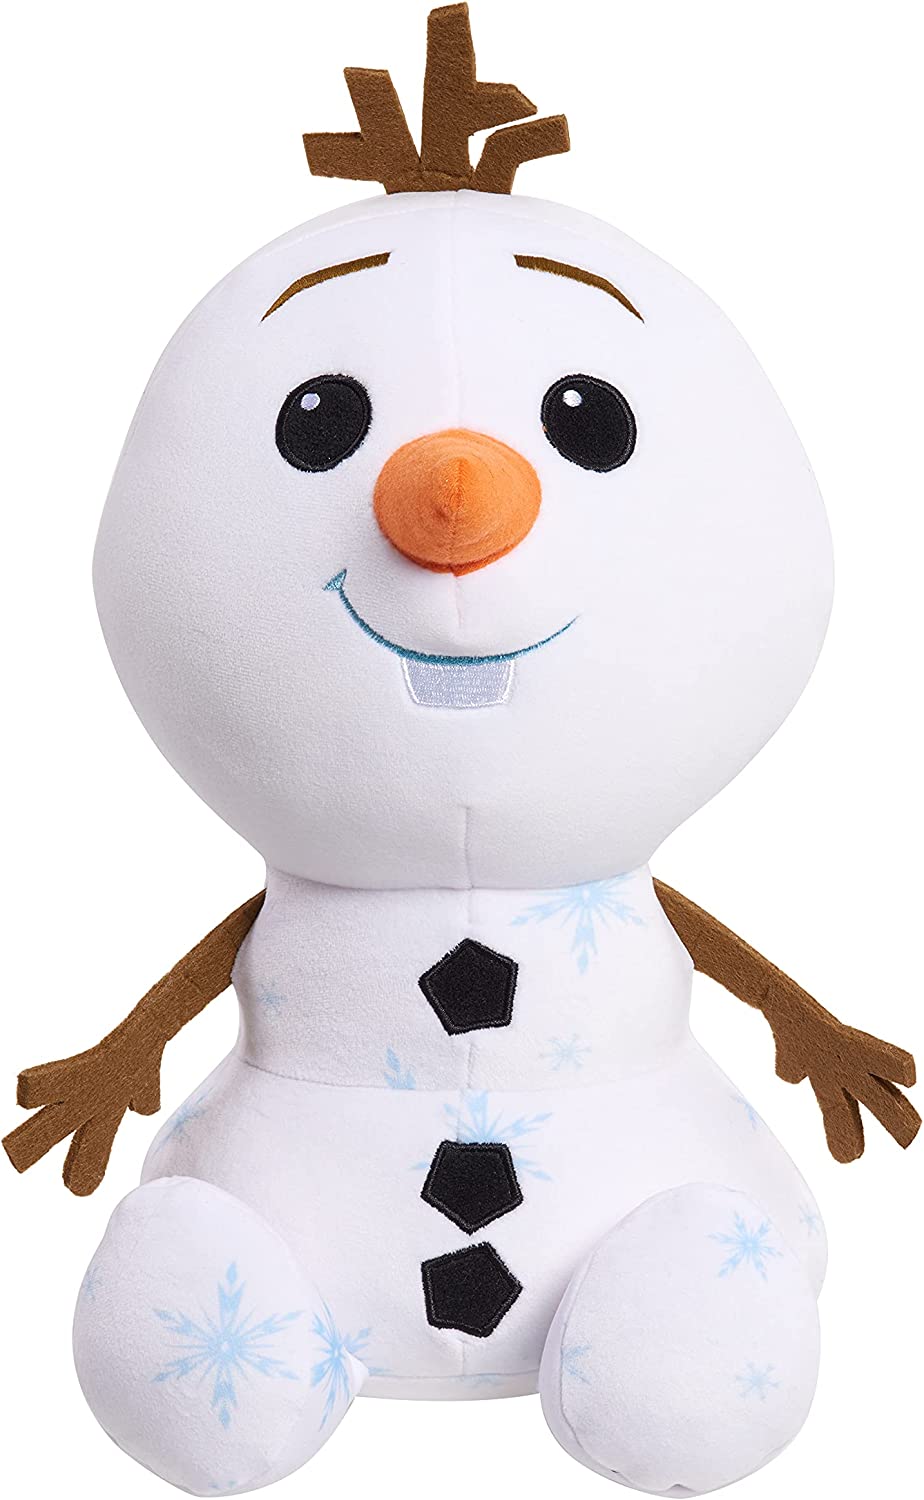 Disney Frozen 2 Olaf Weighted Stuffed Toy